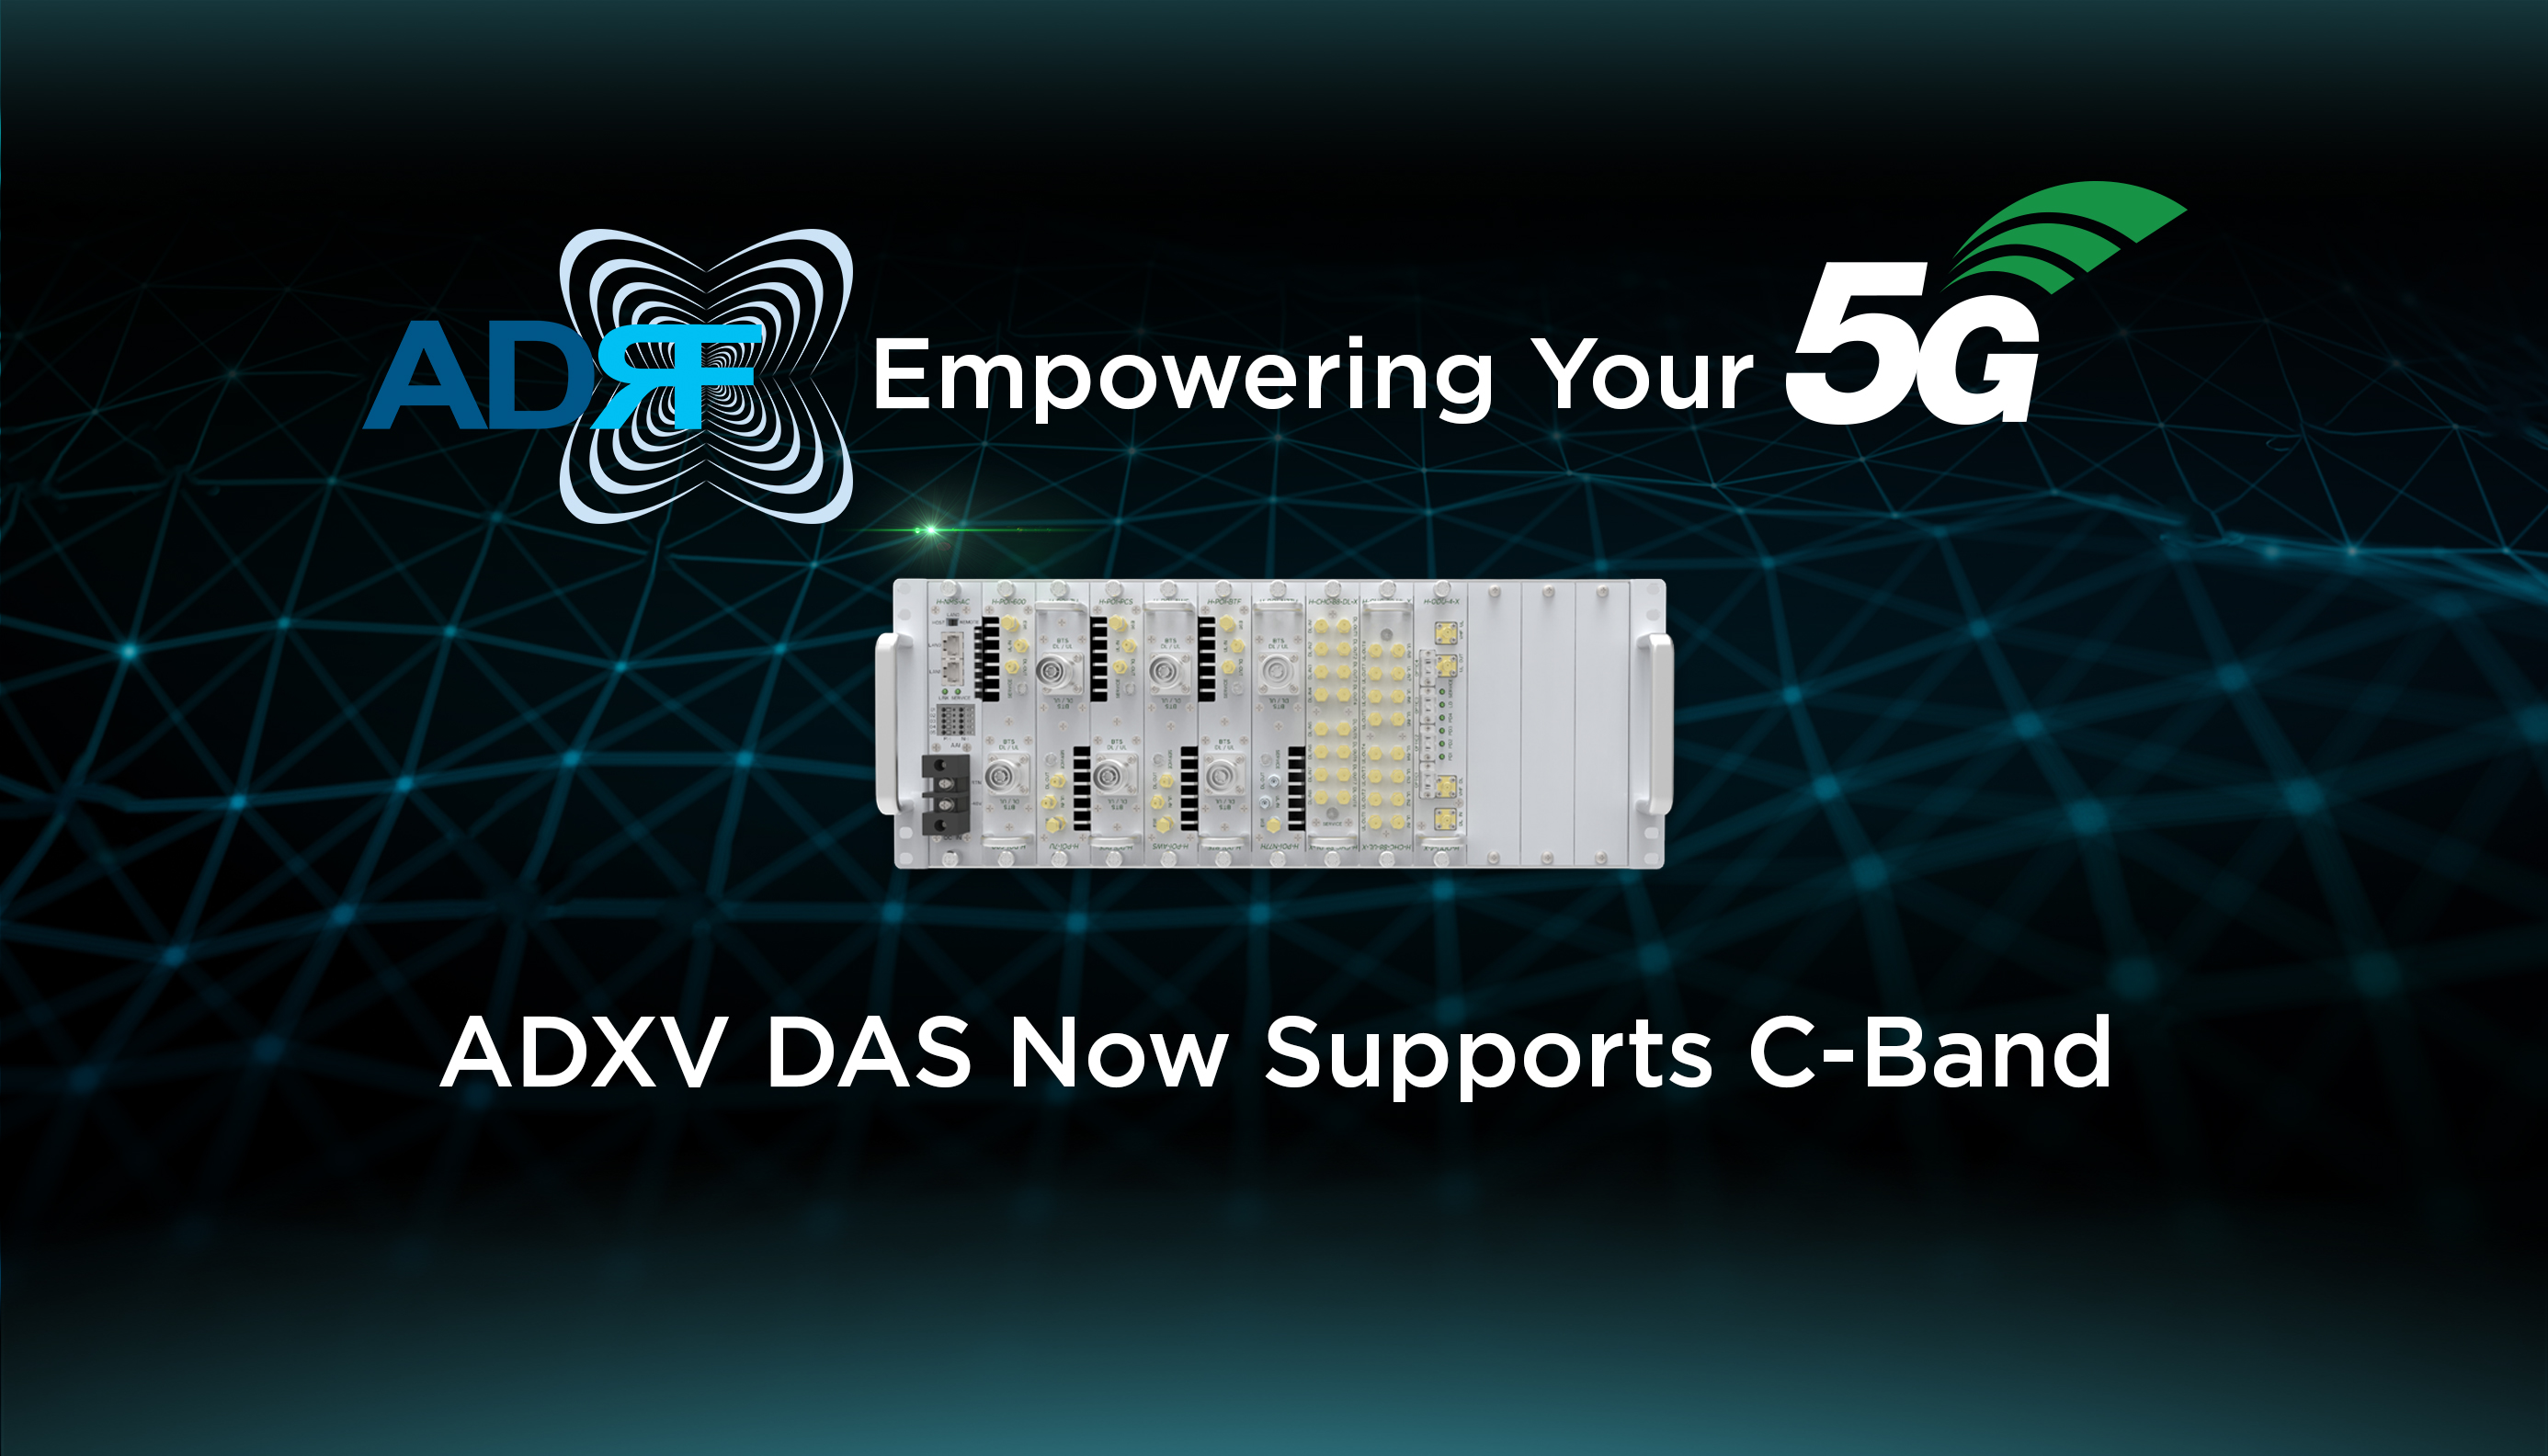 ADRF's ADXV DAS Now Supports C-Band